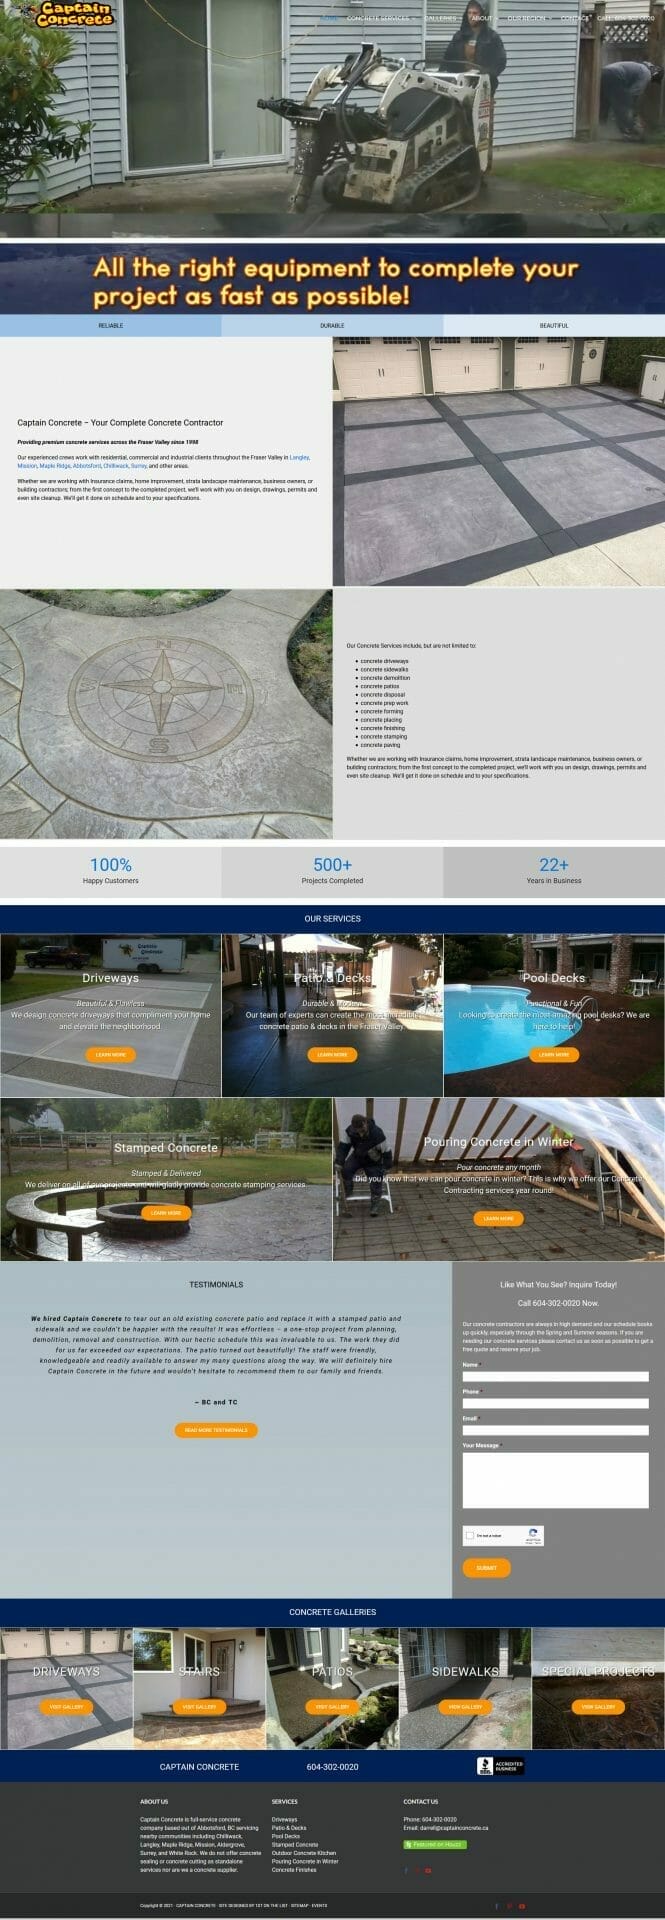 Client examples of stamped concrete